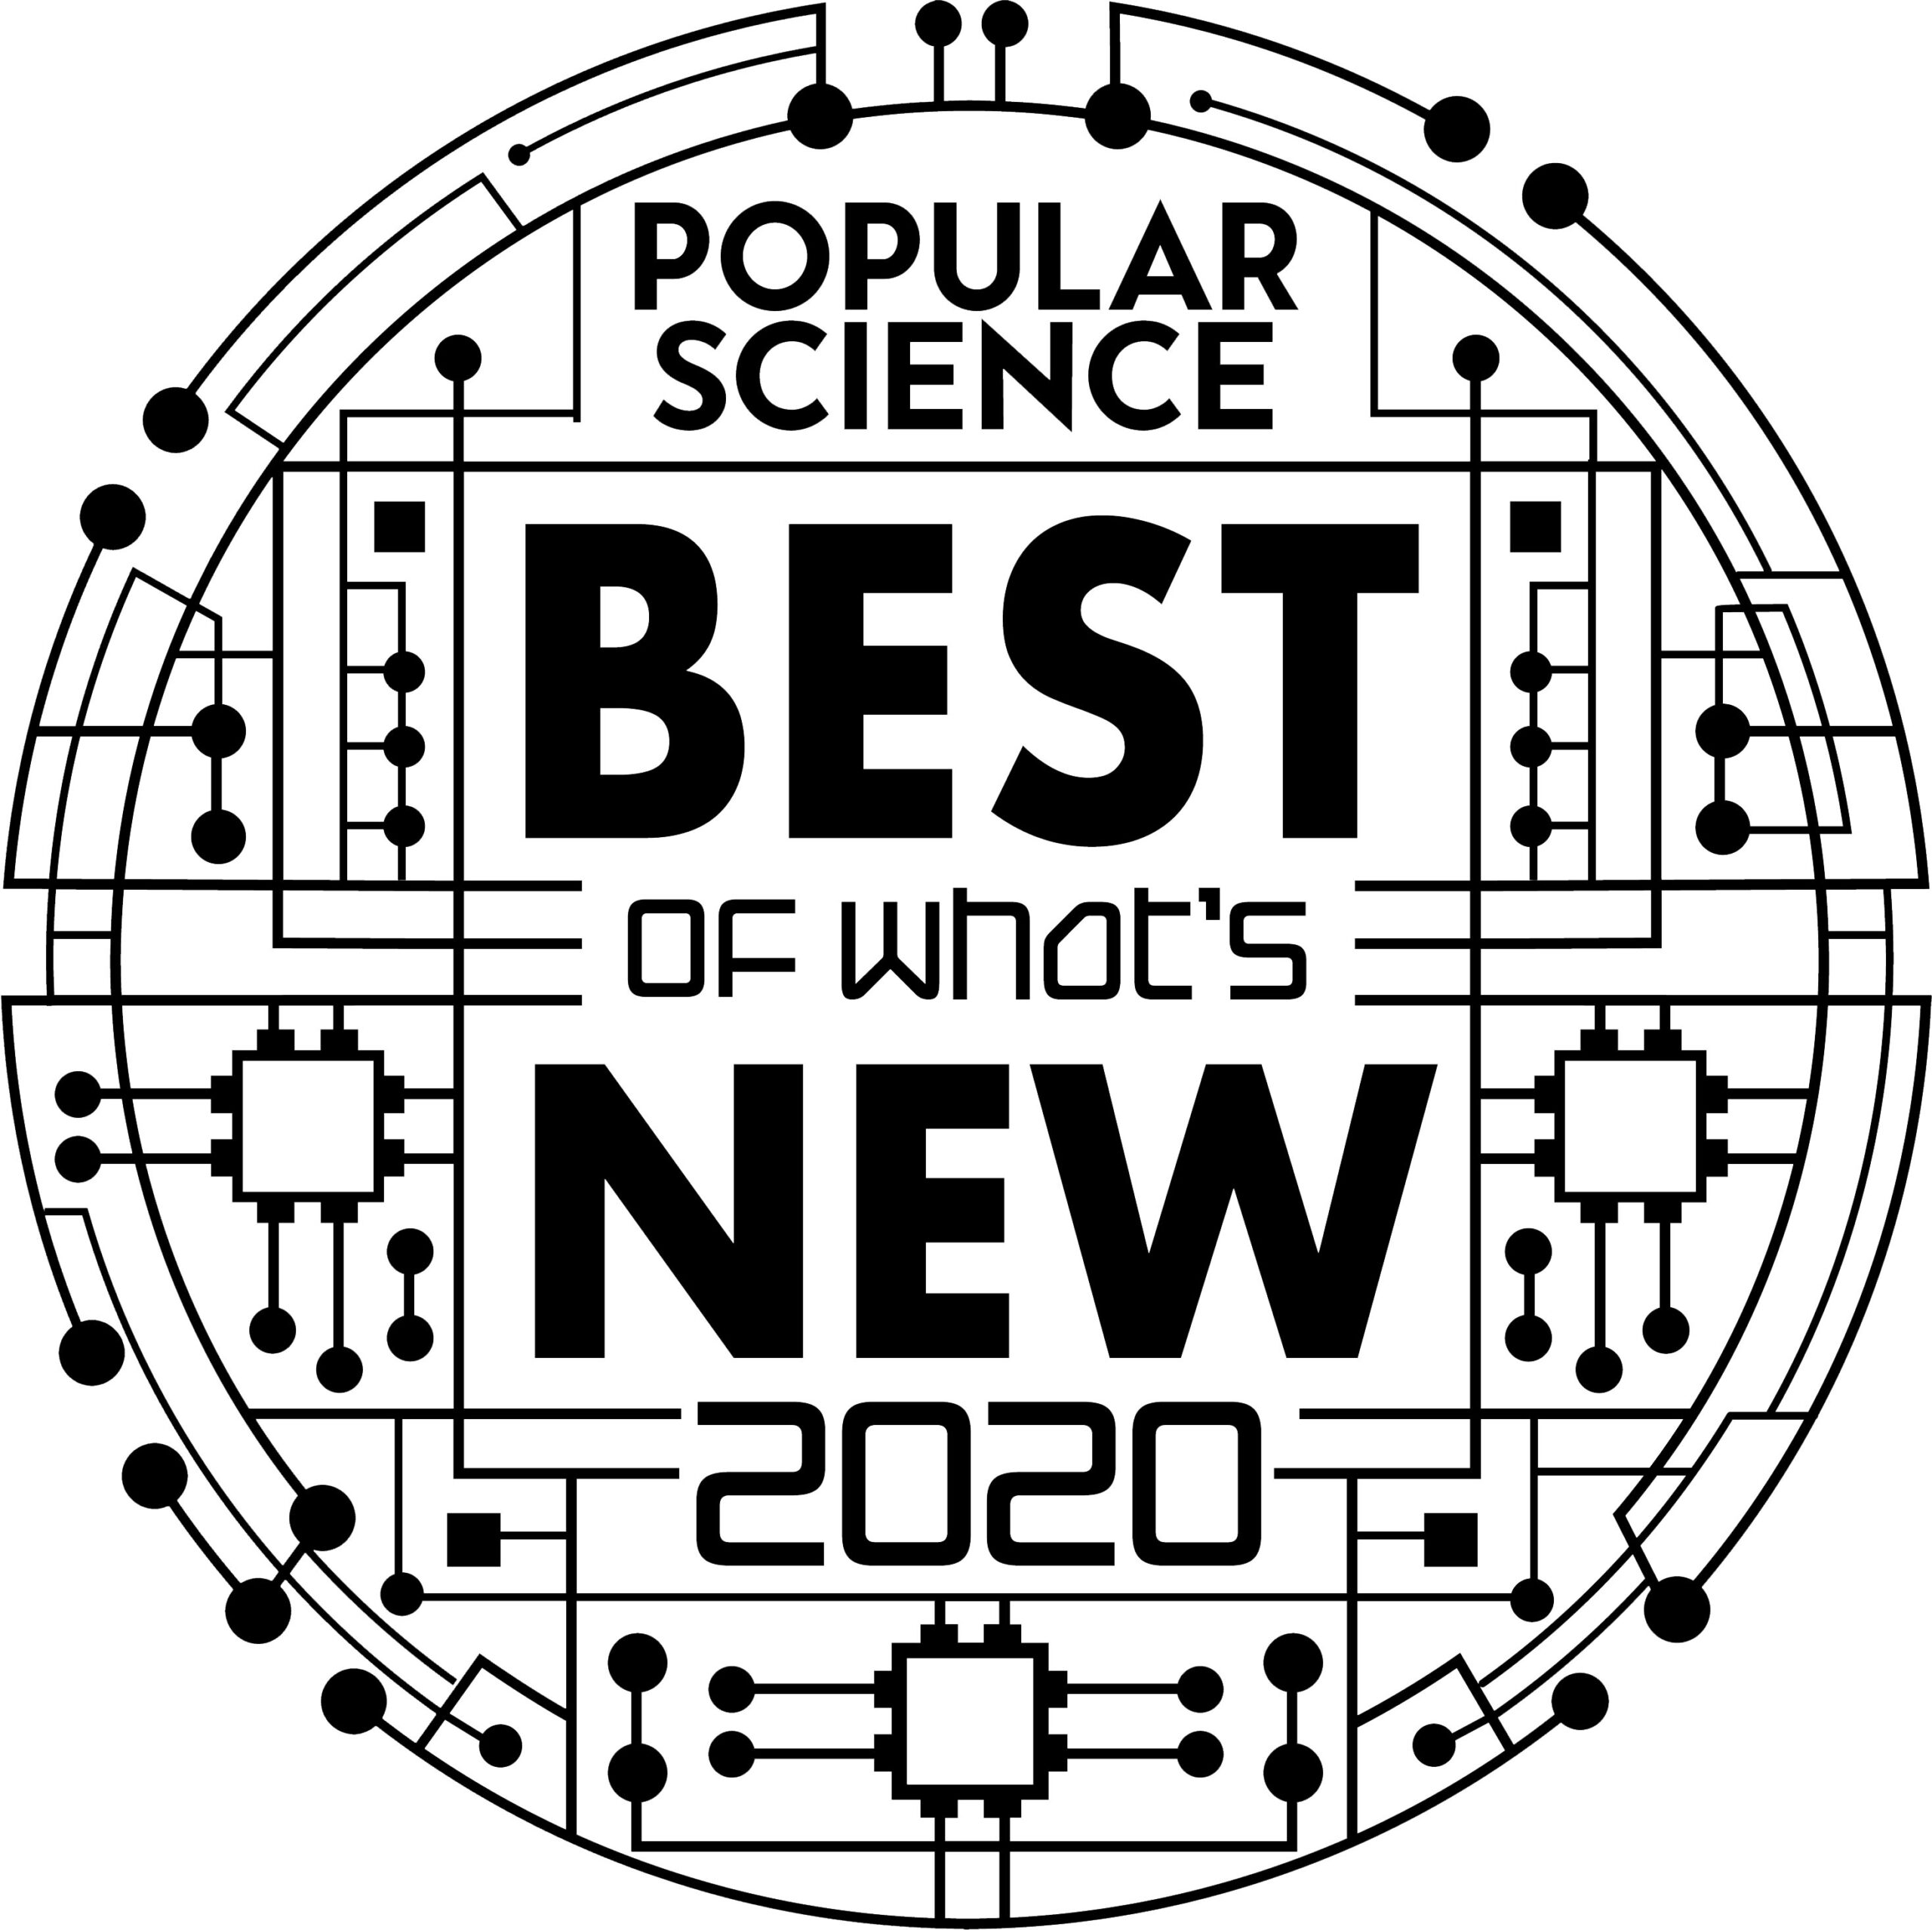 Best of What’s New 2022: Categories